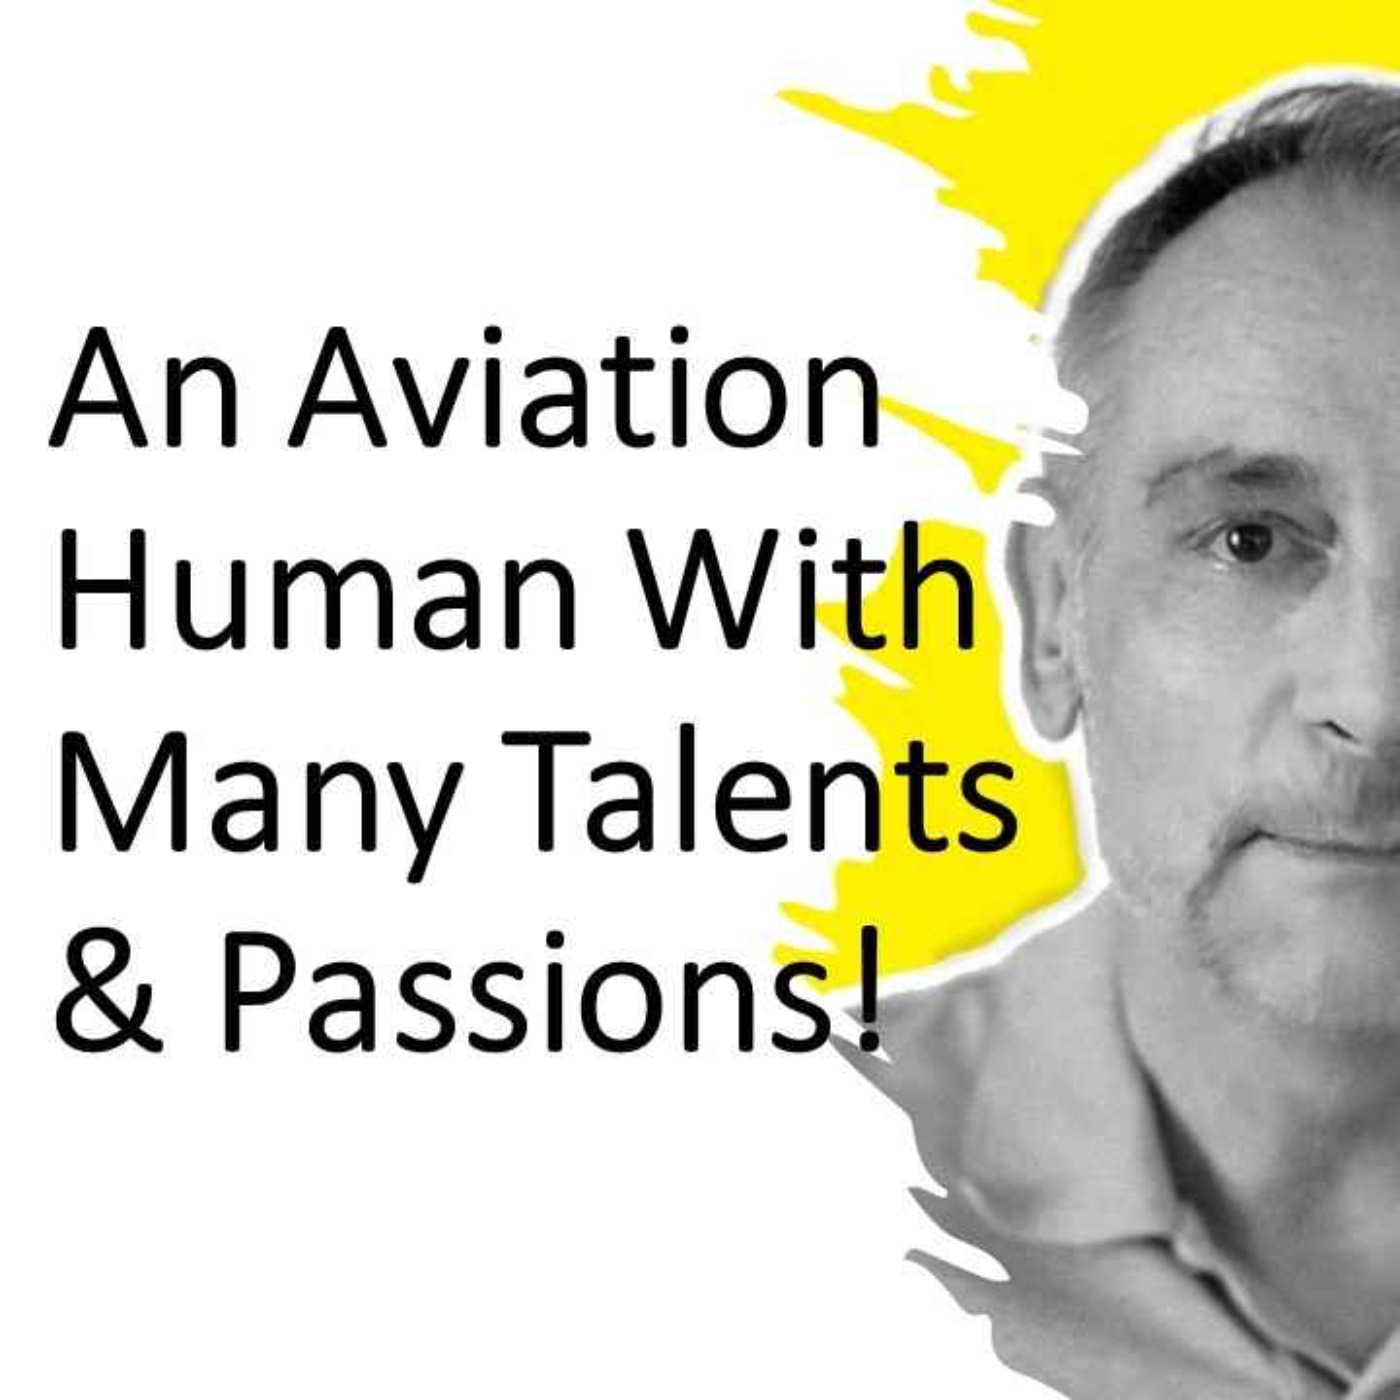 An Aviation Human With Many Talents or Many Passions?